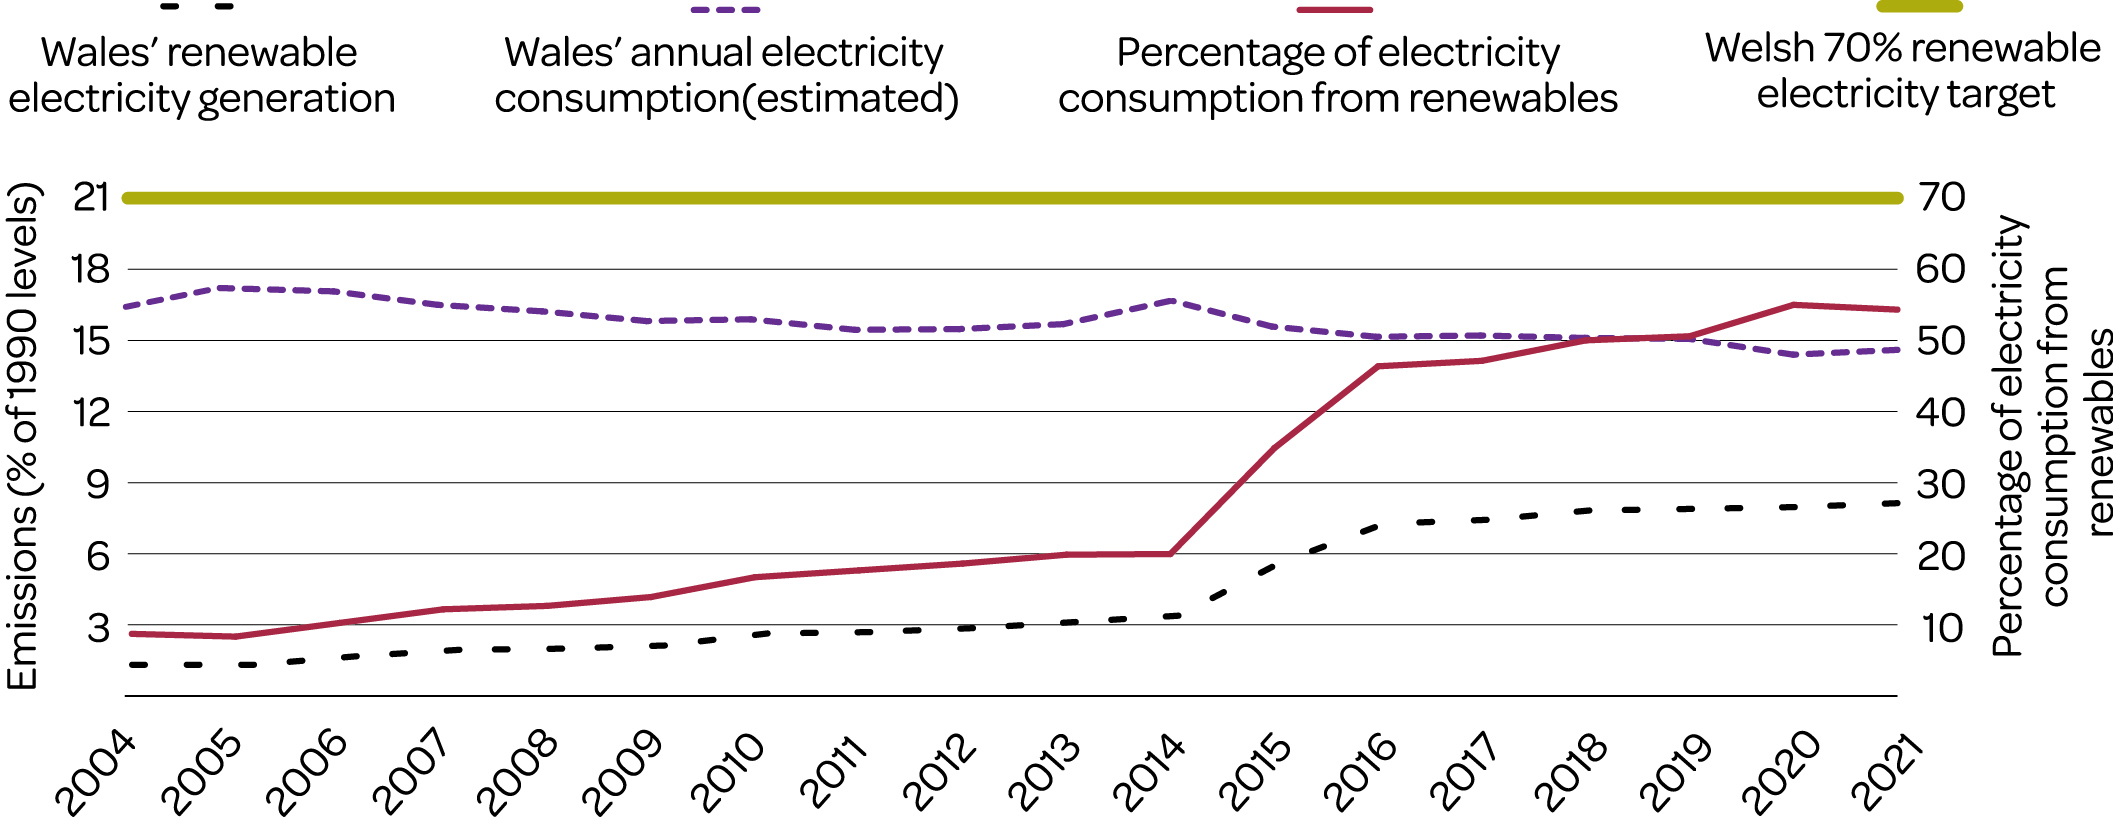 A graph showing the change in renewable electricity generation in Wales, compared to the 70% target, the annual electricity consumption, and the percentage of electricity consumption from renewables. 